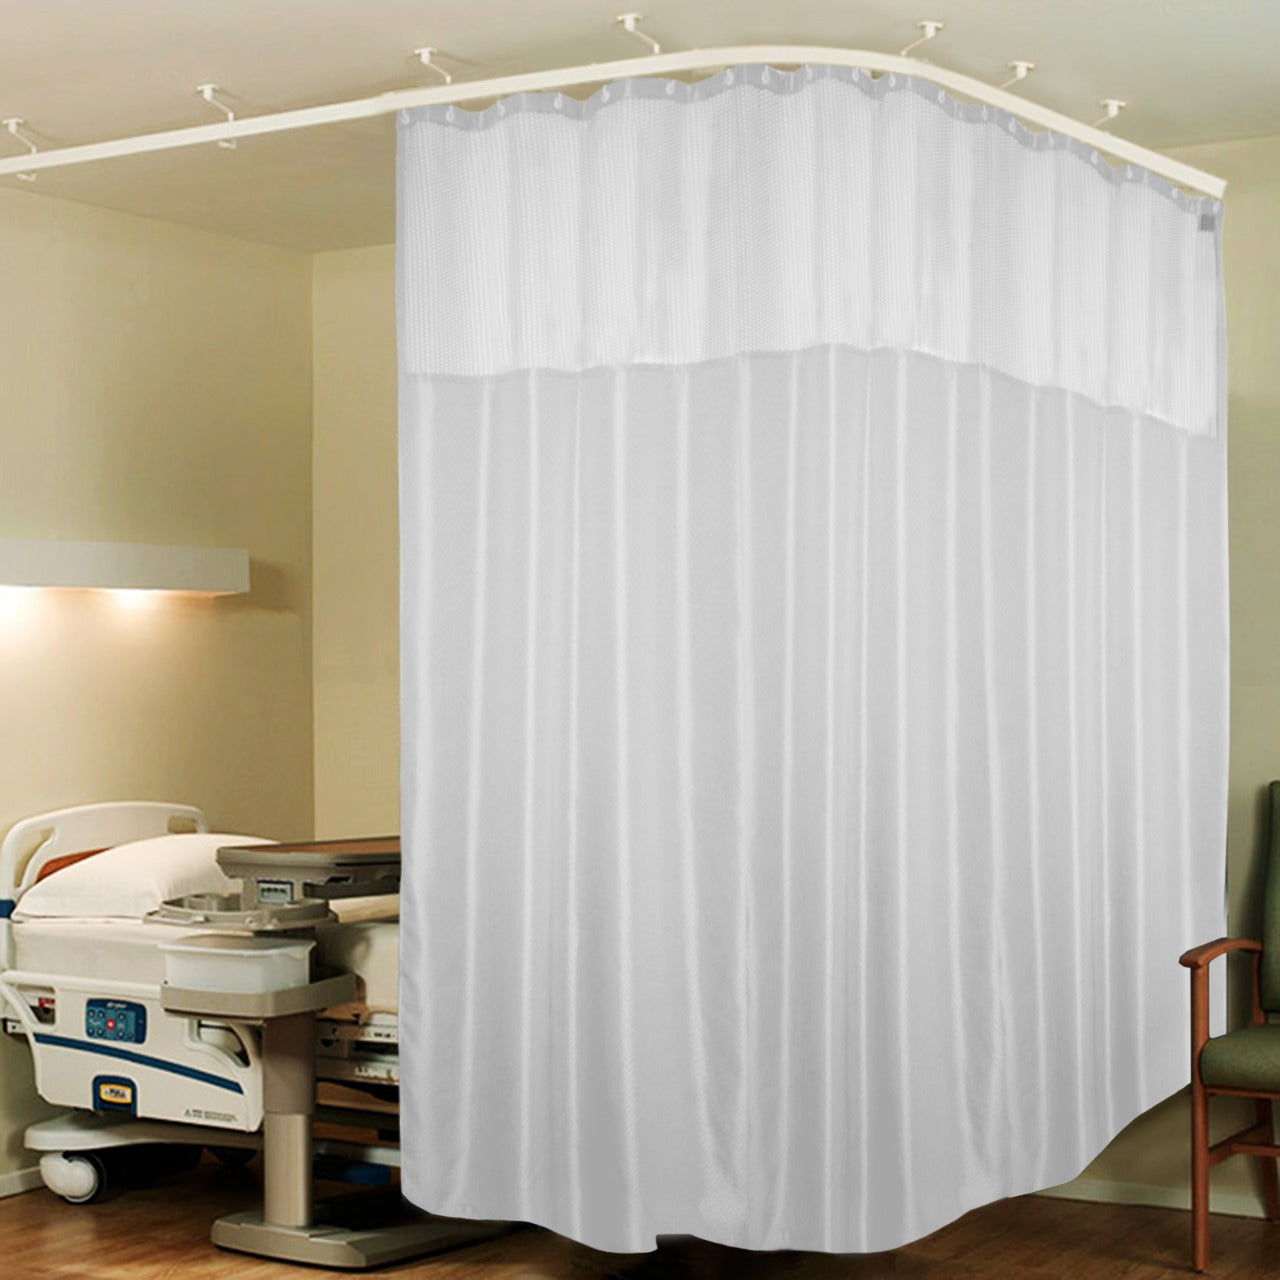 Hospital Partition Curtains, Clinic Curtains Size 16 FT W x 7 ft H, Channel Curtains with Net Fabric, 100% polyester 32 Rustfree Metal Eyelets 32 Plastic Hook, White, Zig Zag Design (16x7 FT, Pk of 1)